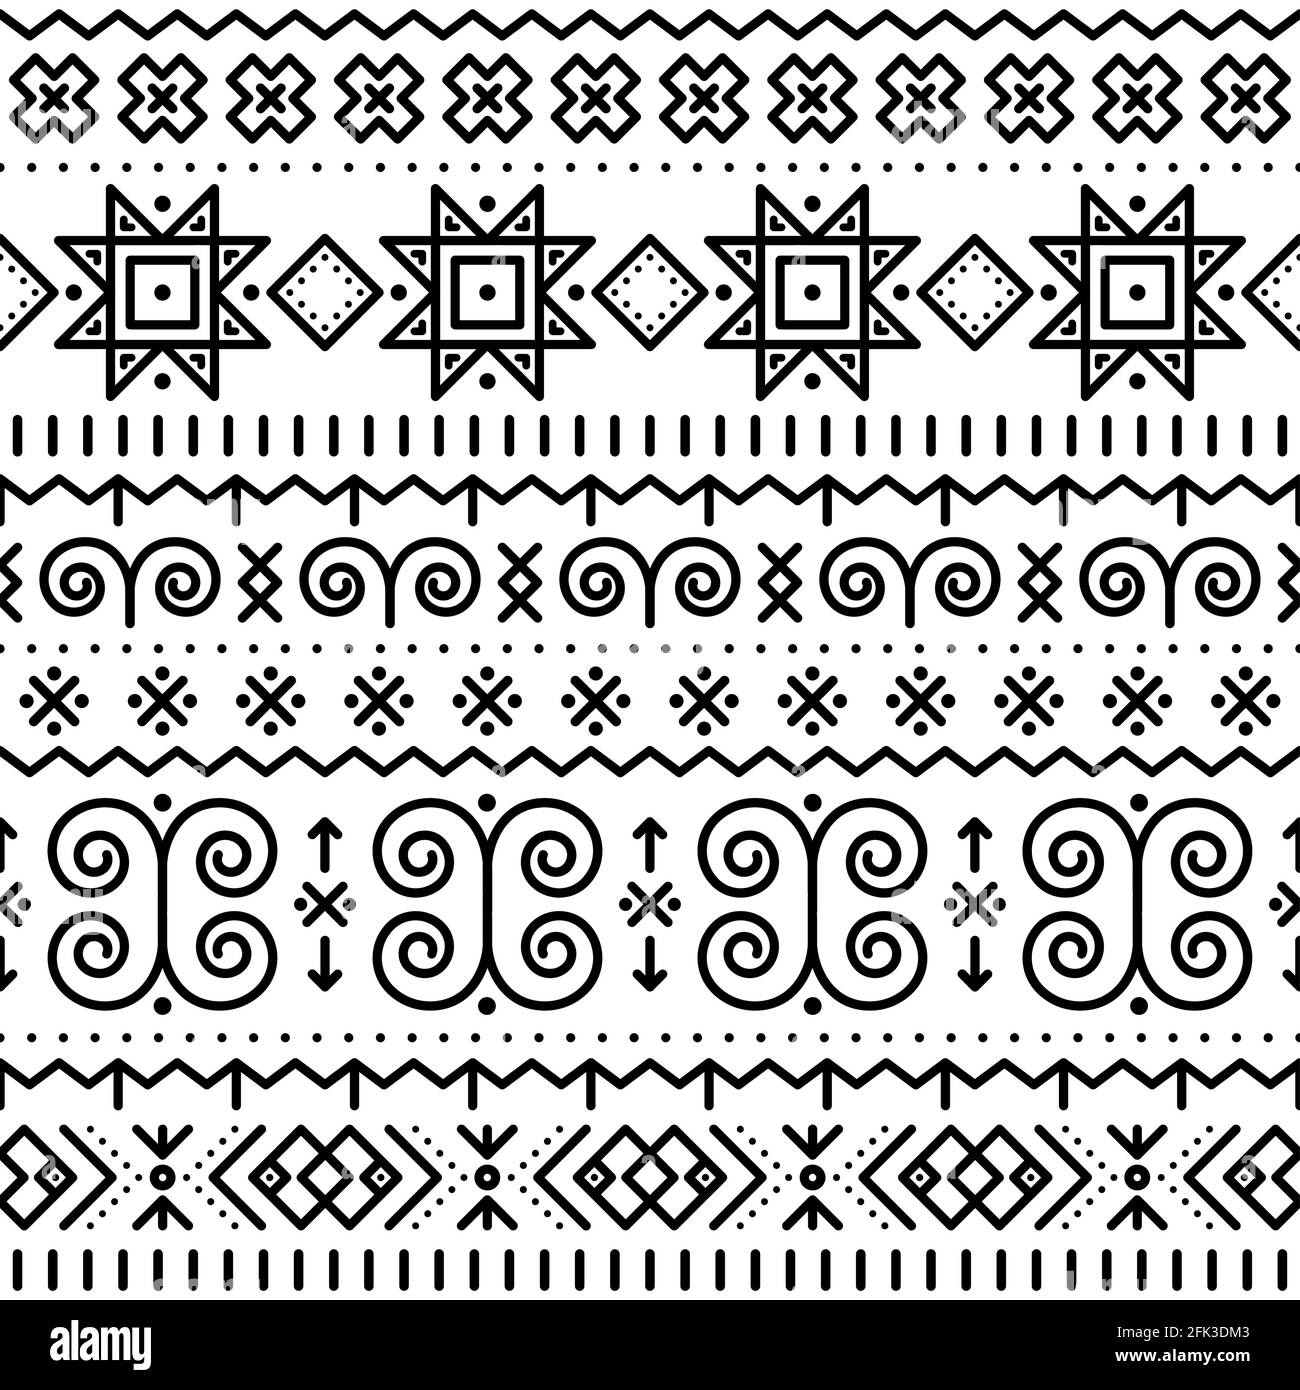 Slovak folk art vector seamless geometric black pattern on white with swirls, zig-zag shapes inspired by traditional painted art from village Cicmany Stock Vector